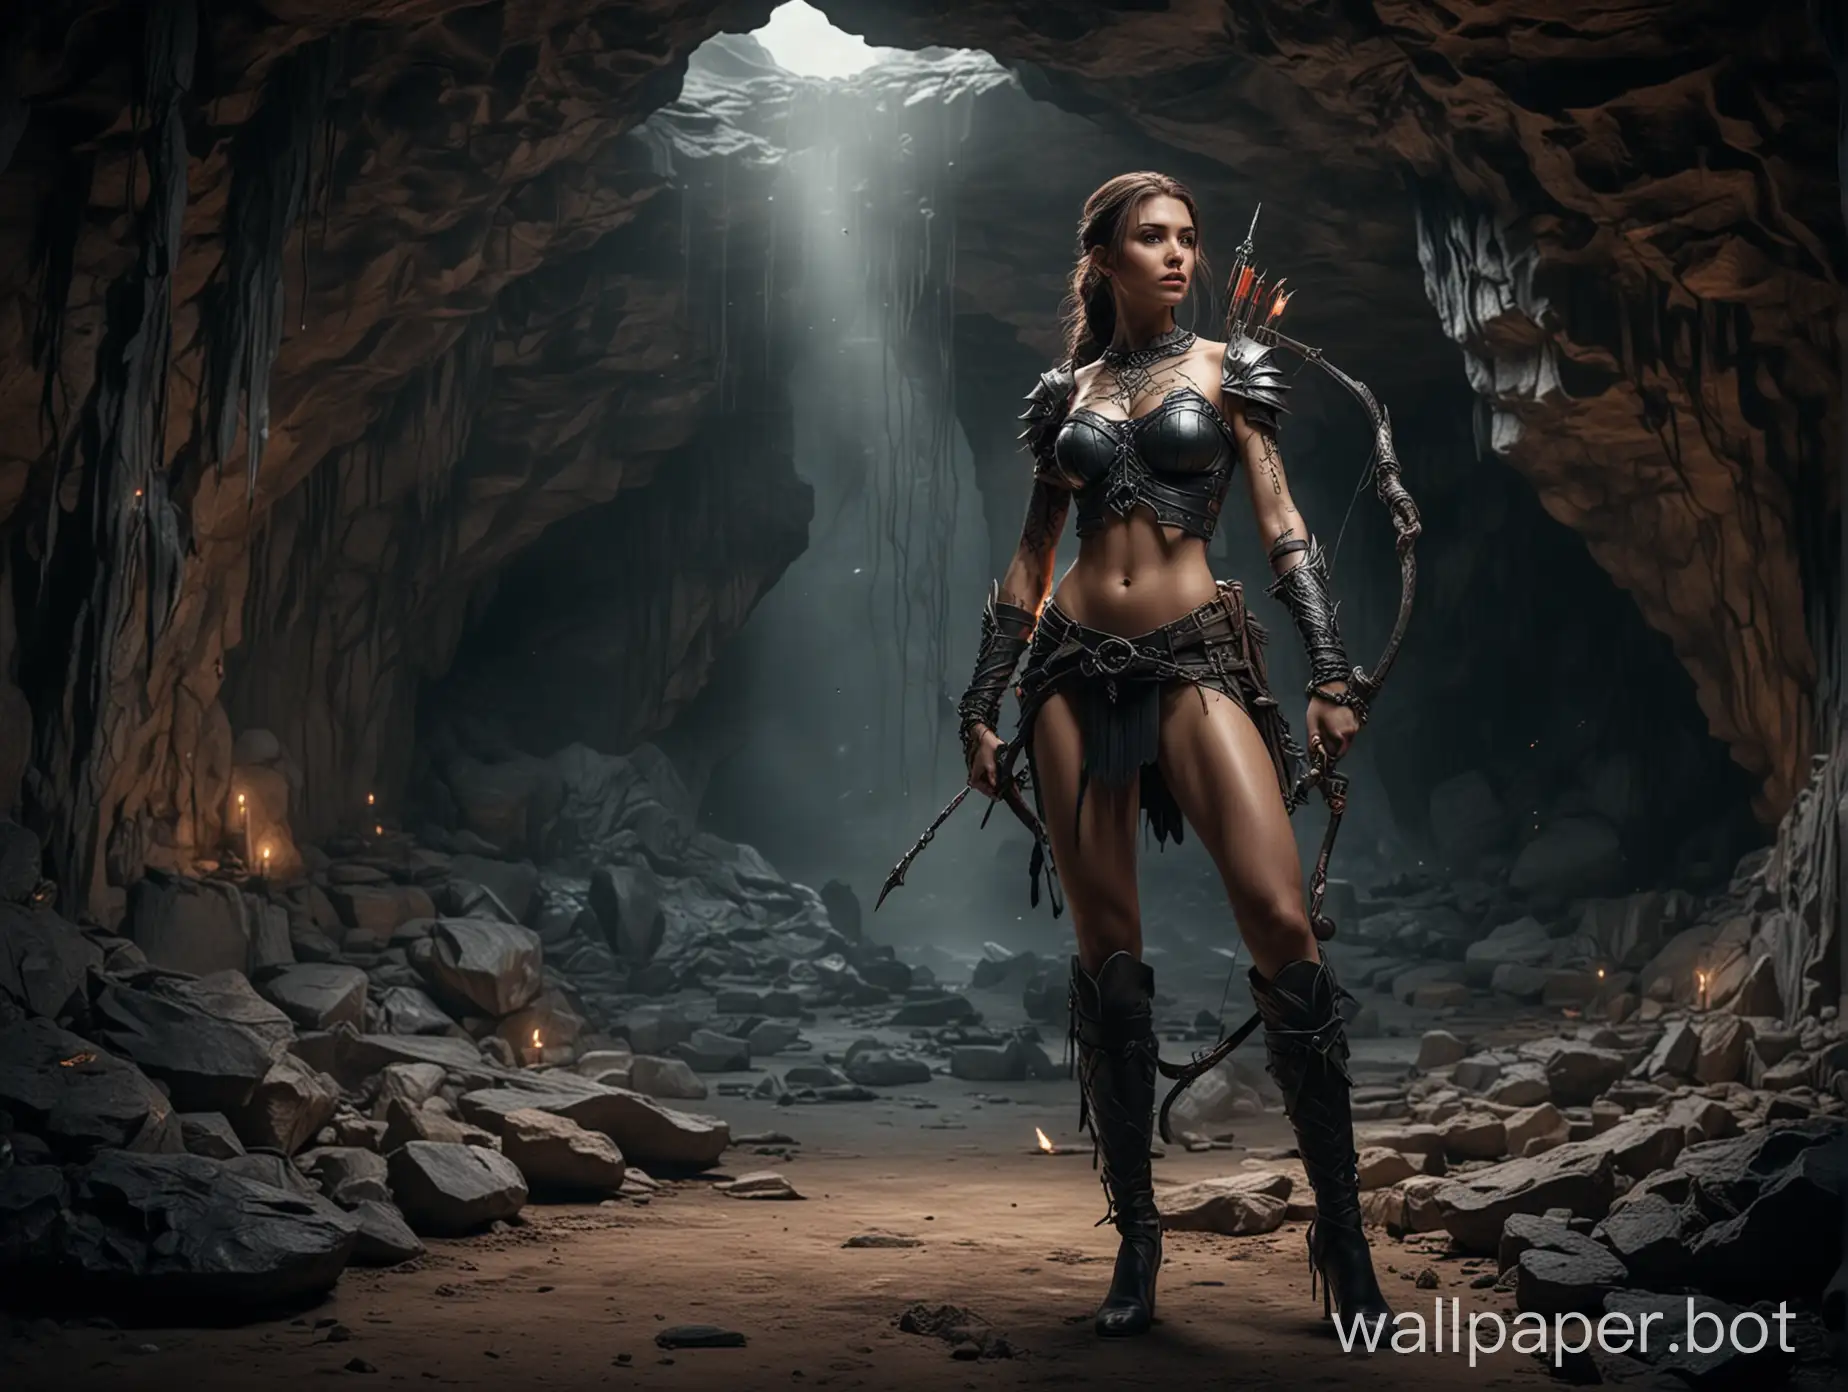 beautiful fantasy woman with tattoo in the cave. she must be an warrior archer. full body length. dark scene. resolution 4k